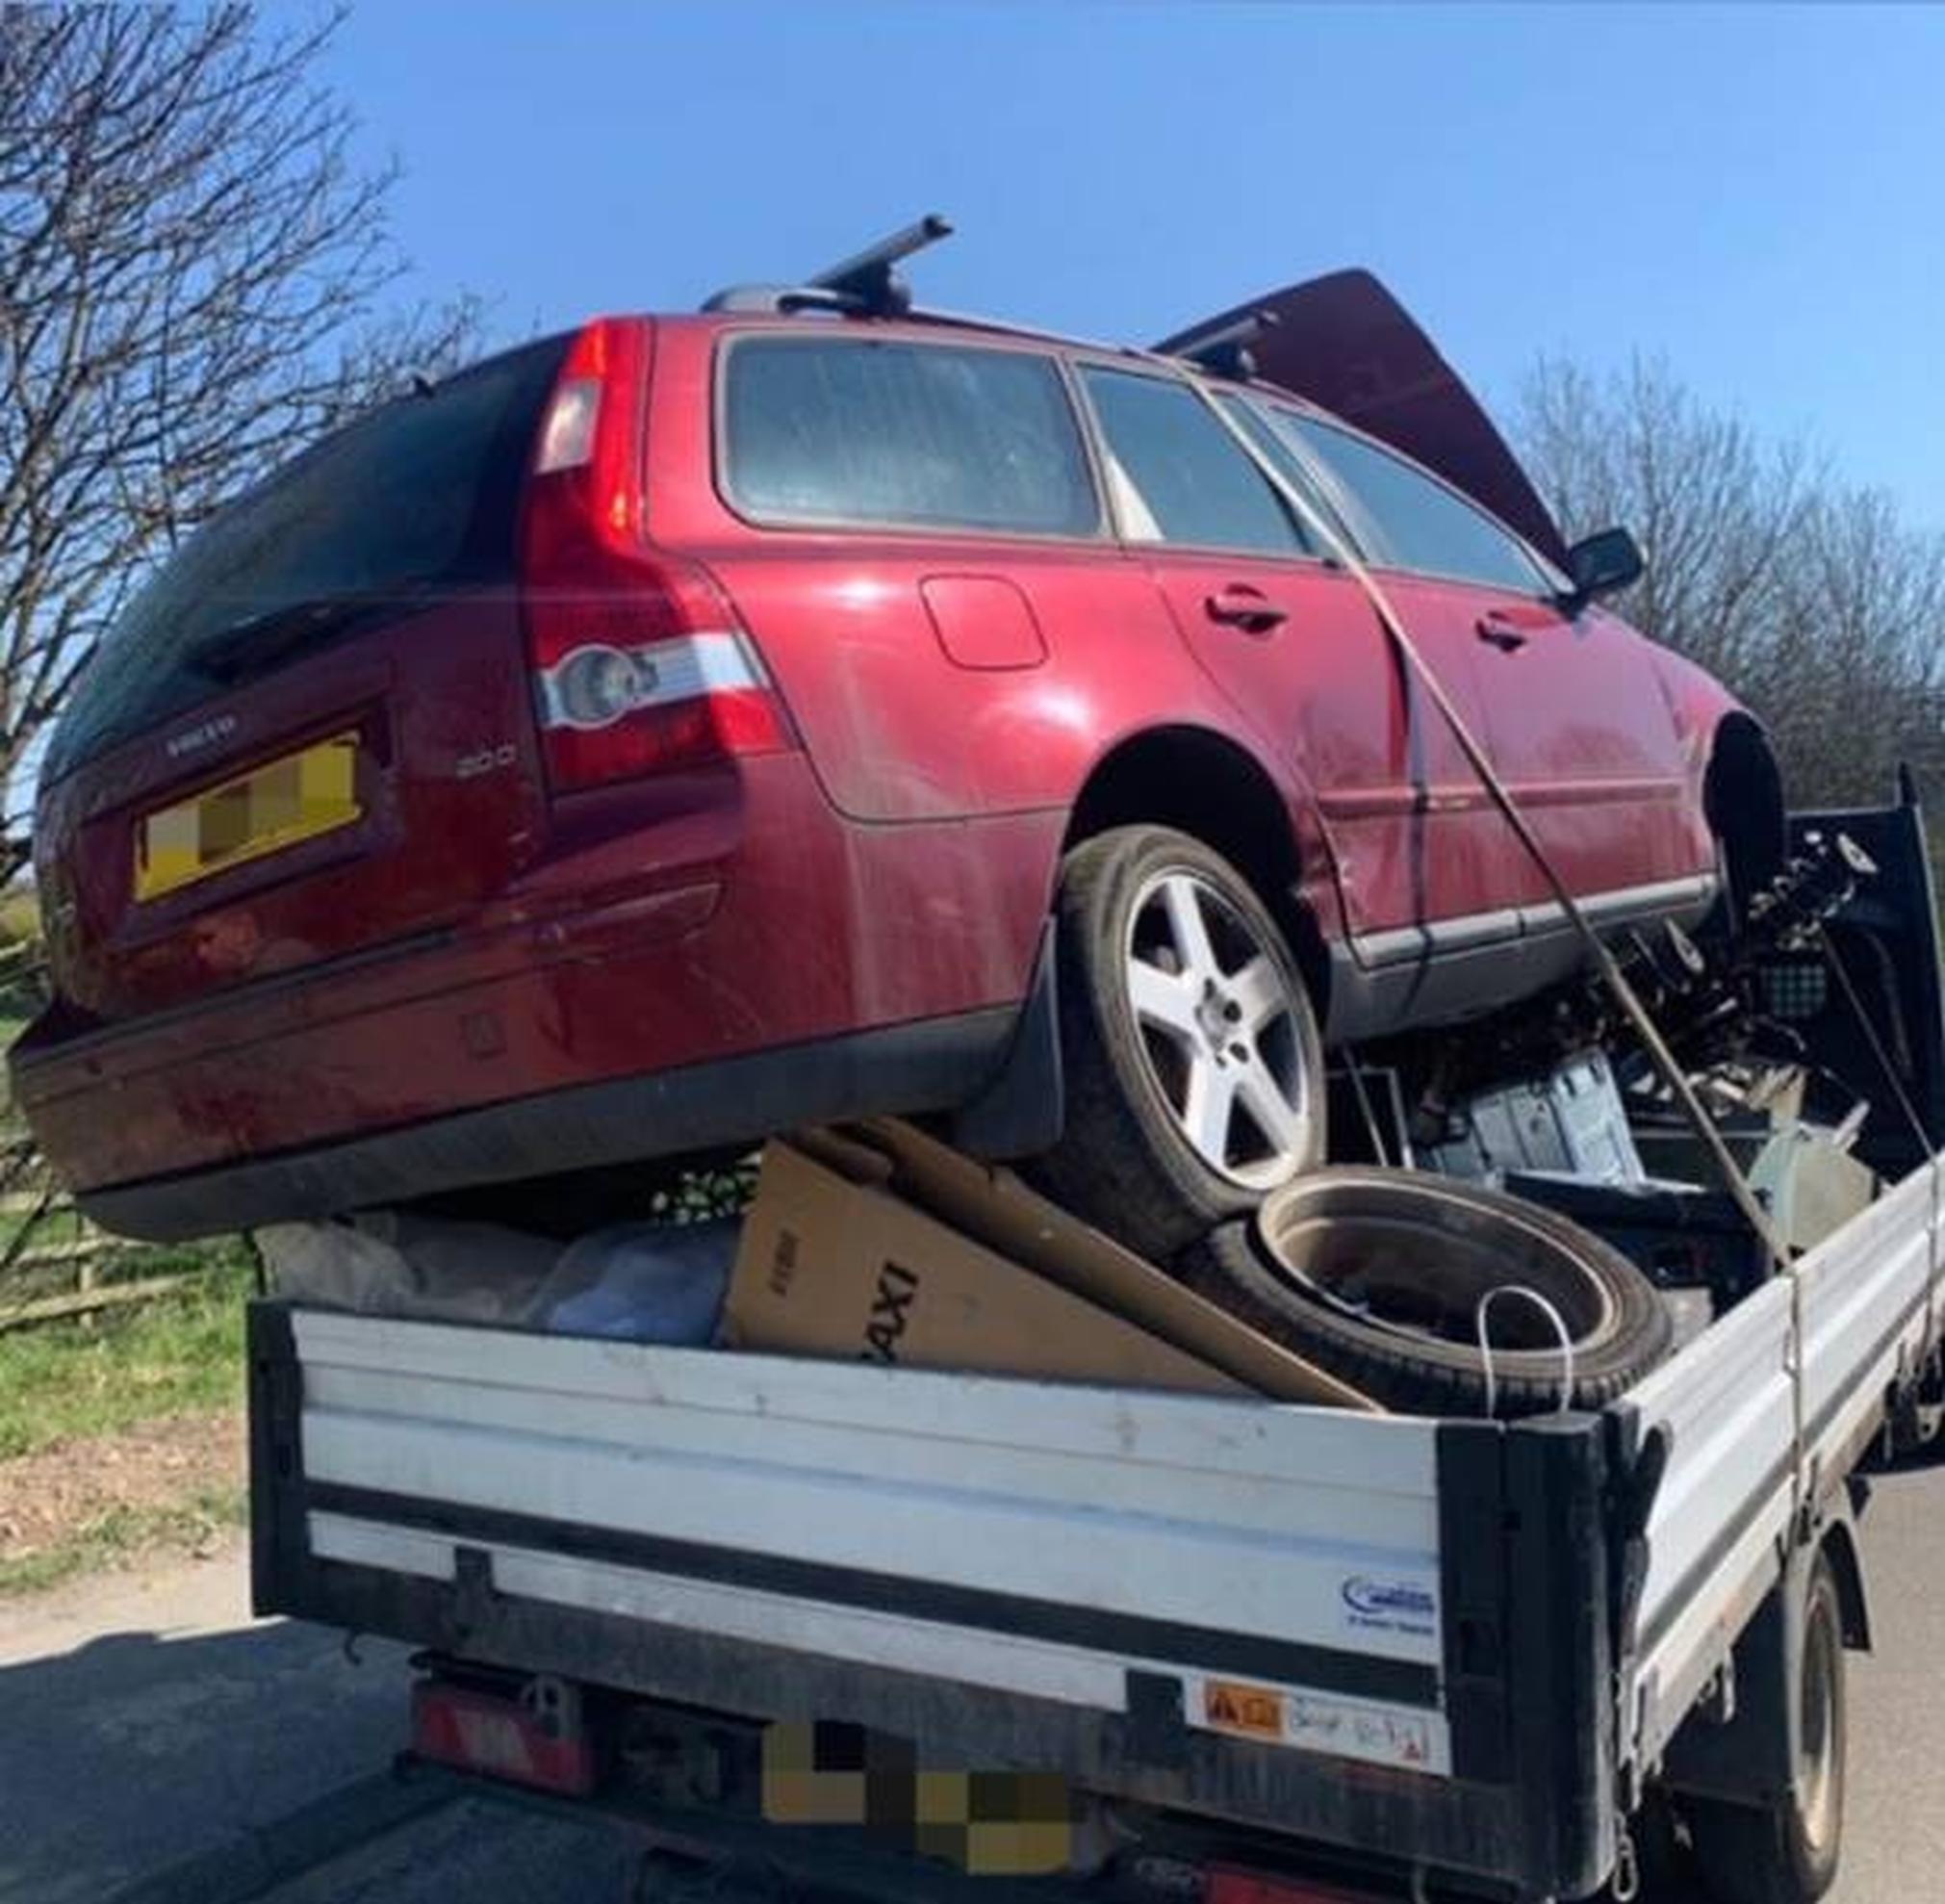 A car precariously balanced on the back of a scrap van was found by Northumbria Police during Operation Brigantia